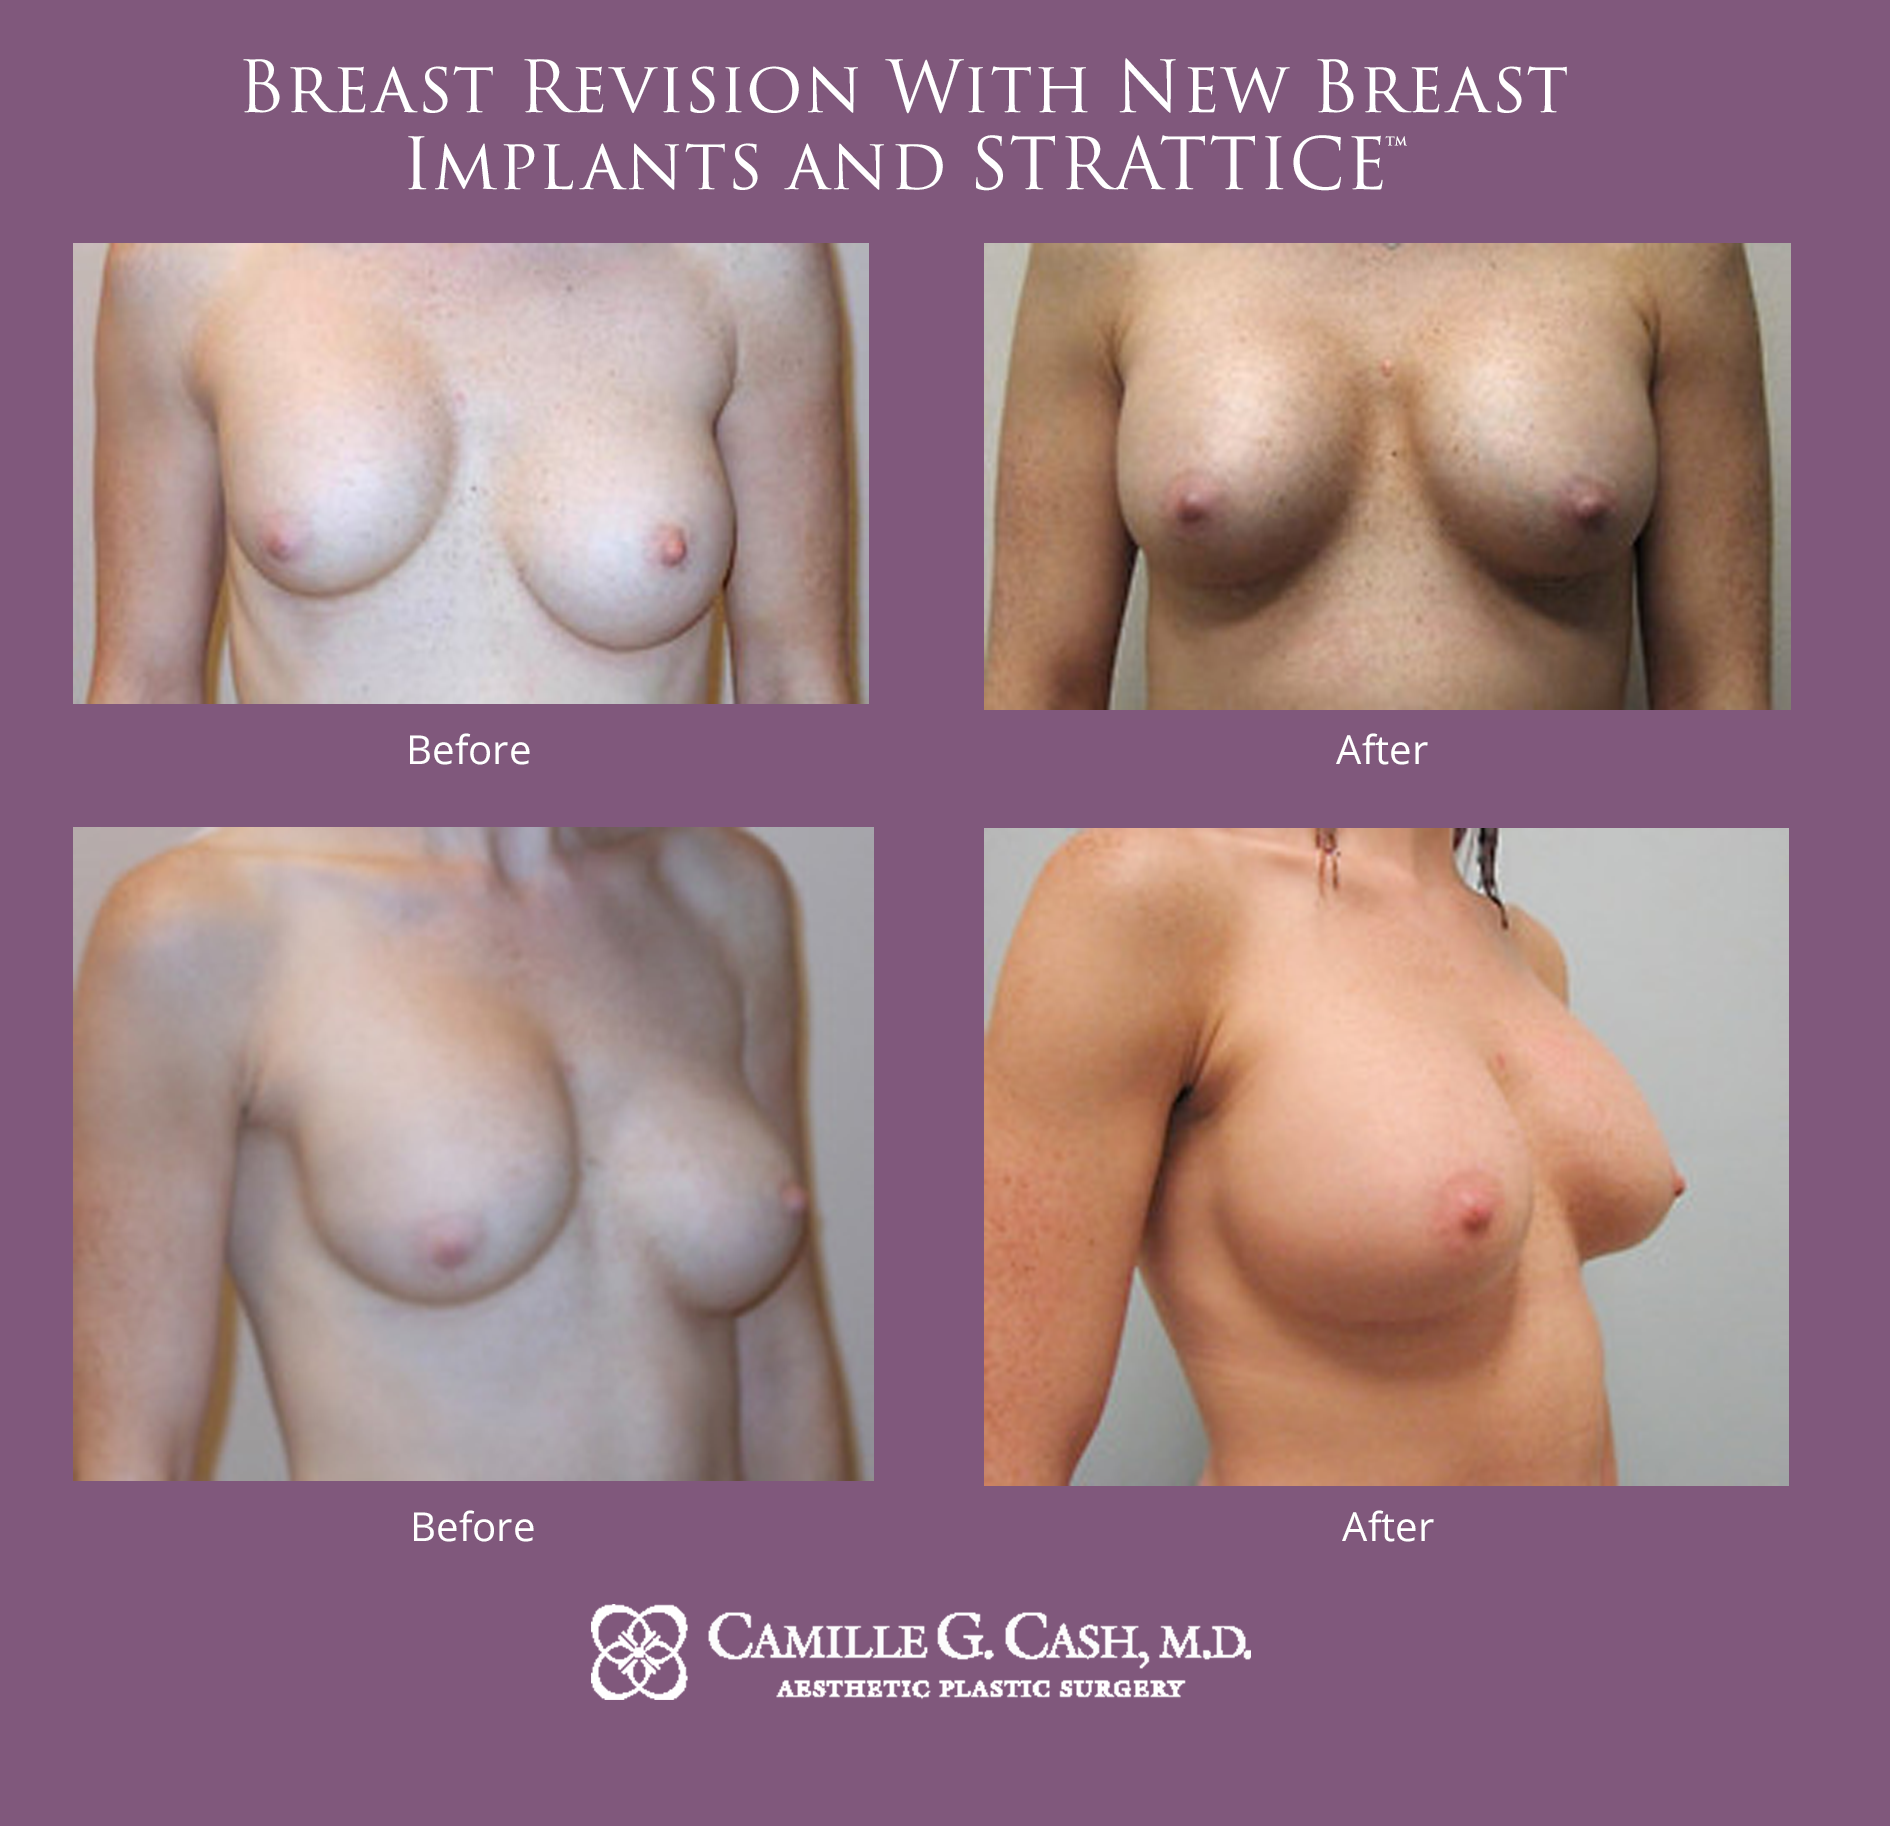 Breast revision with new breast implants and Strattice before and after photos